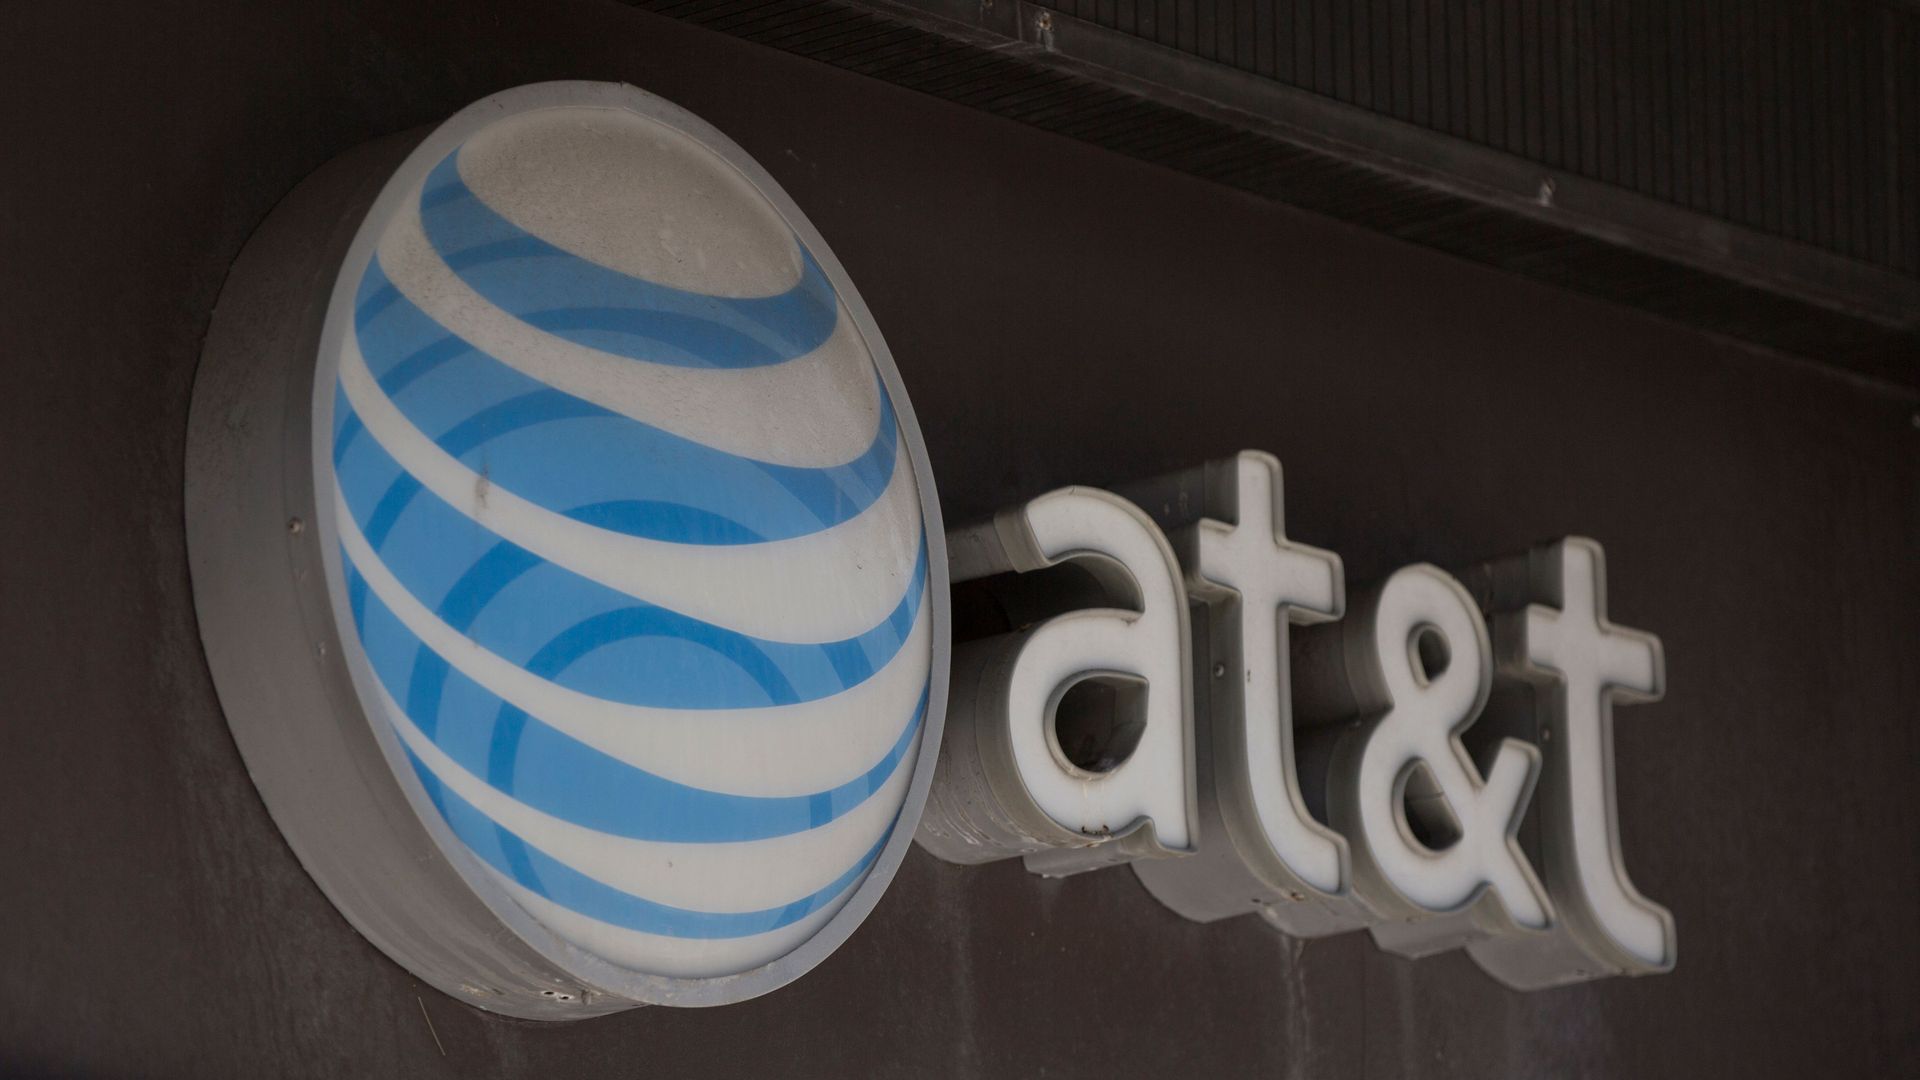 A photo of AT&T's logo and next to the company's name.